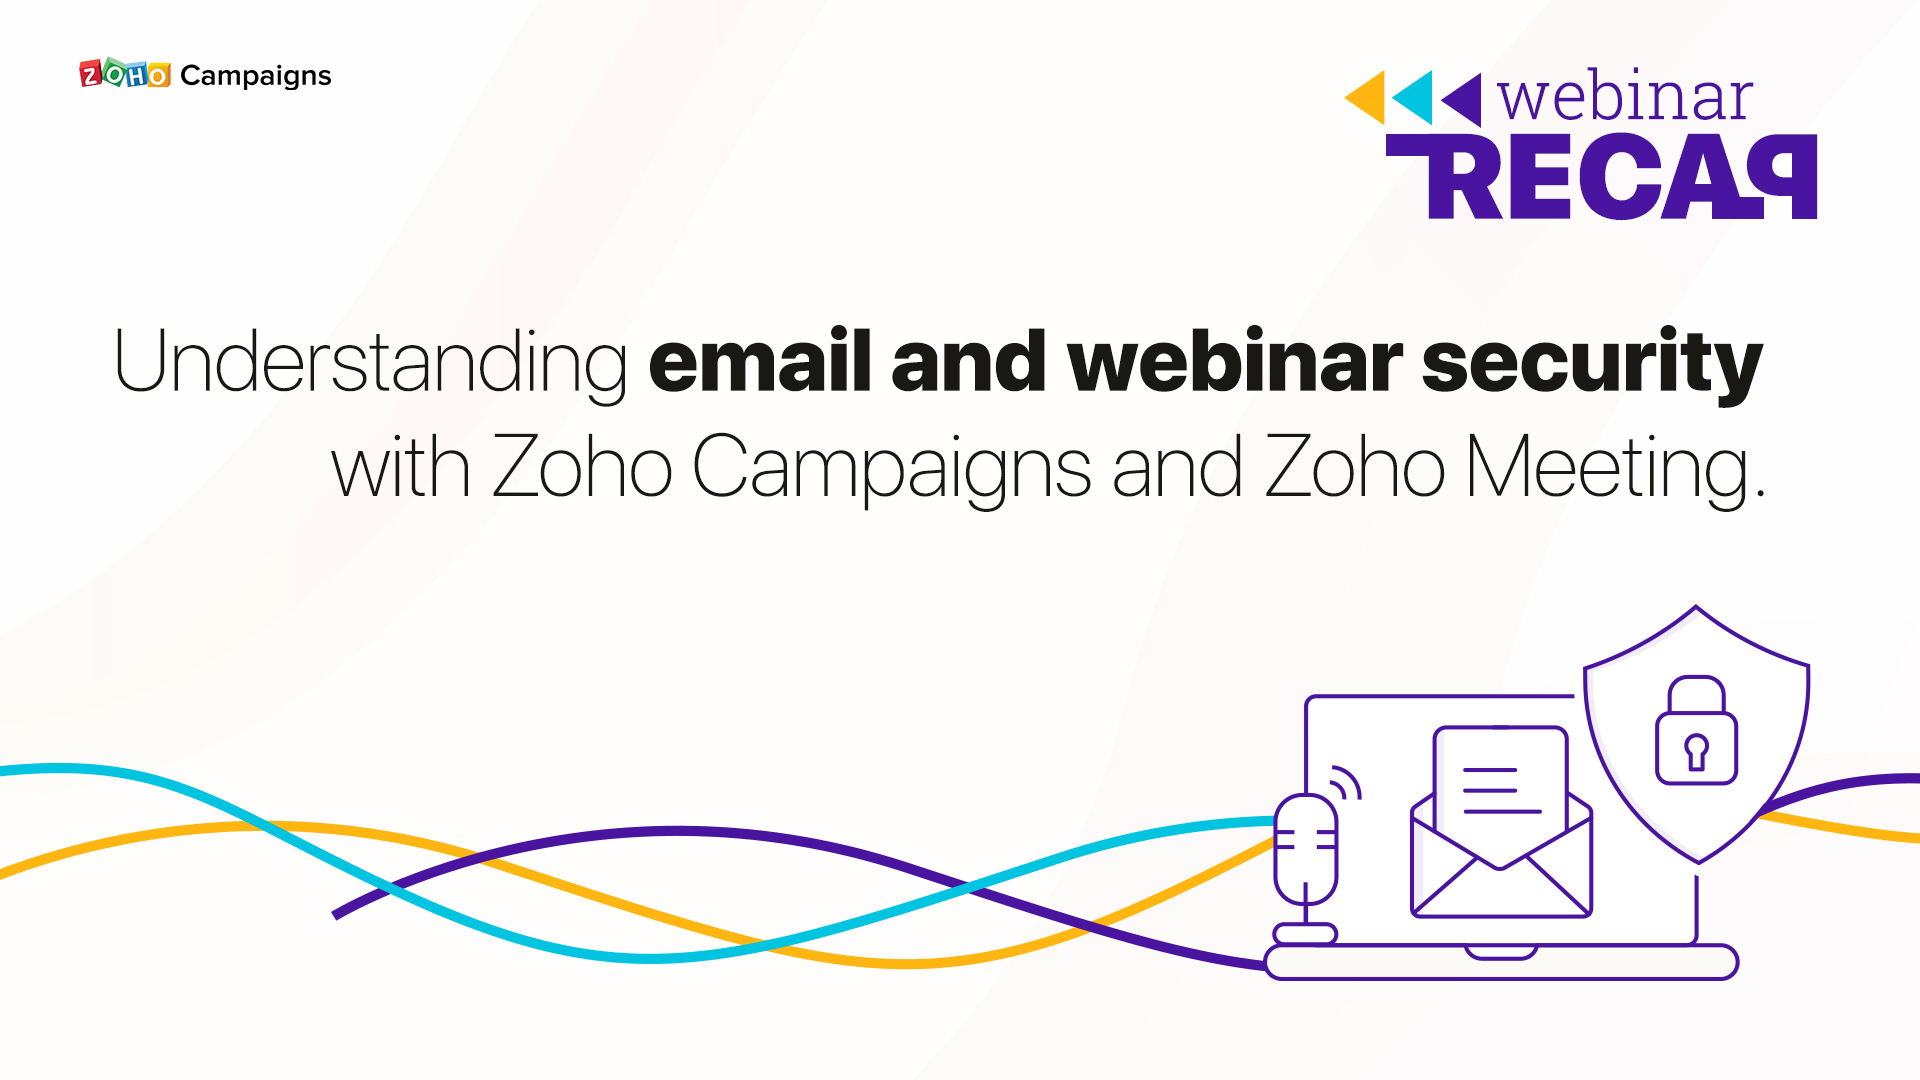 Webinar Recap Blog: Understanding email and webinar security with Zoho Campaigns and Zoho Meeting